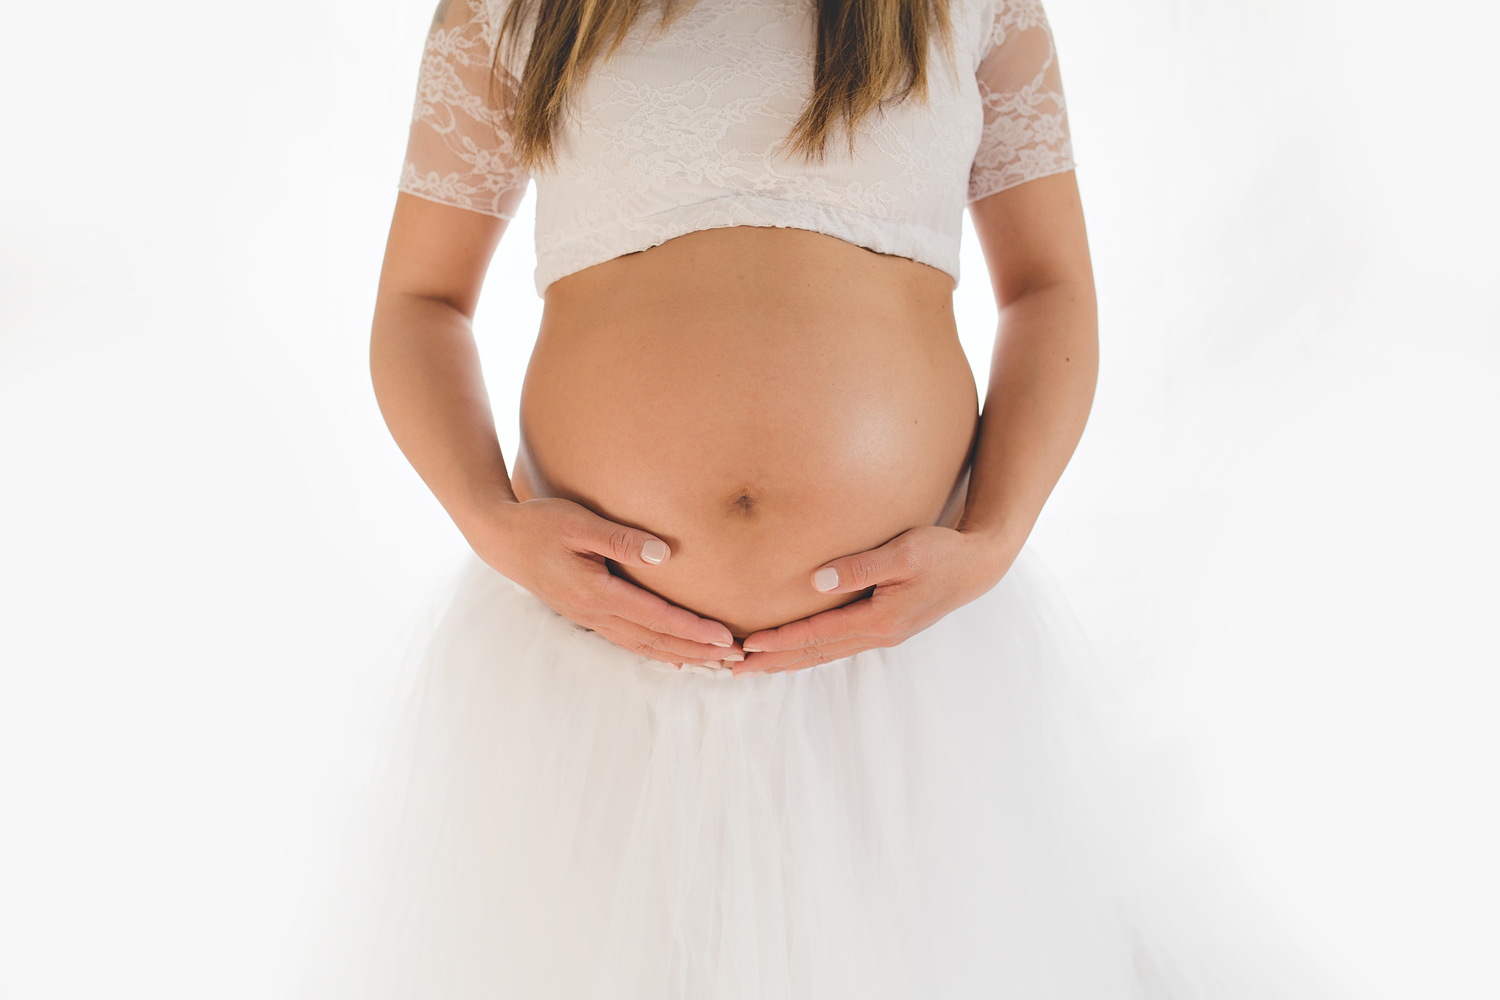 Expectant mom photographed in white tutu for her maternity session.